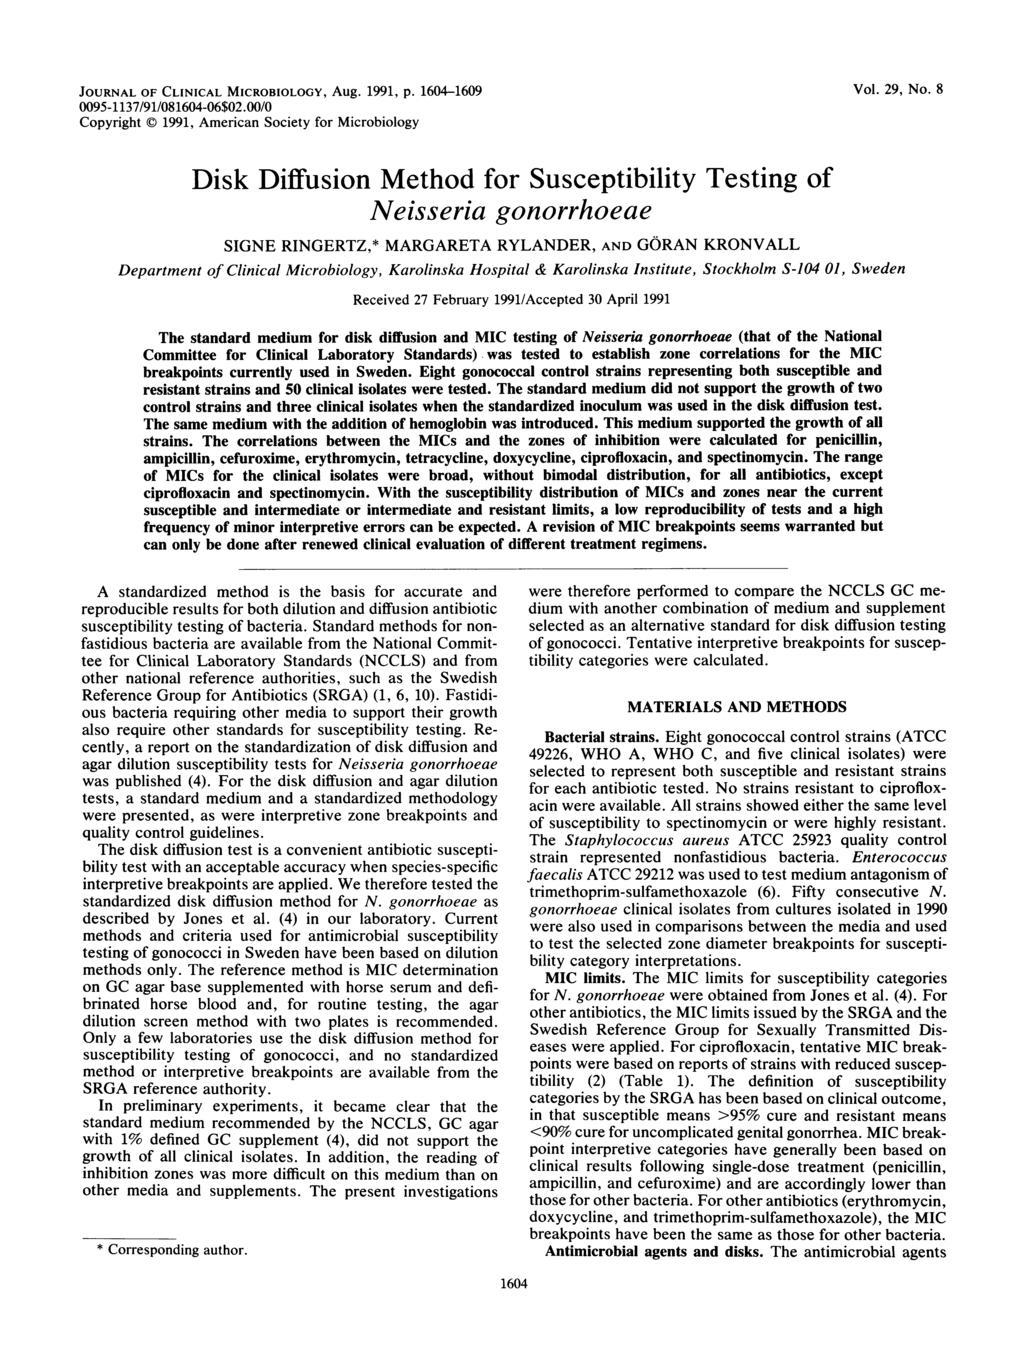 JOURNAL OF CLINICAL MICROBIOLOGY, Aug. 1991, p. 1604-1609 0095-1137/91/081604-06$02.00/0 Copyright 1991, American Society for Microbiology Vol. 29, No.